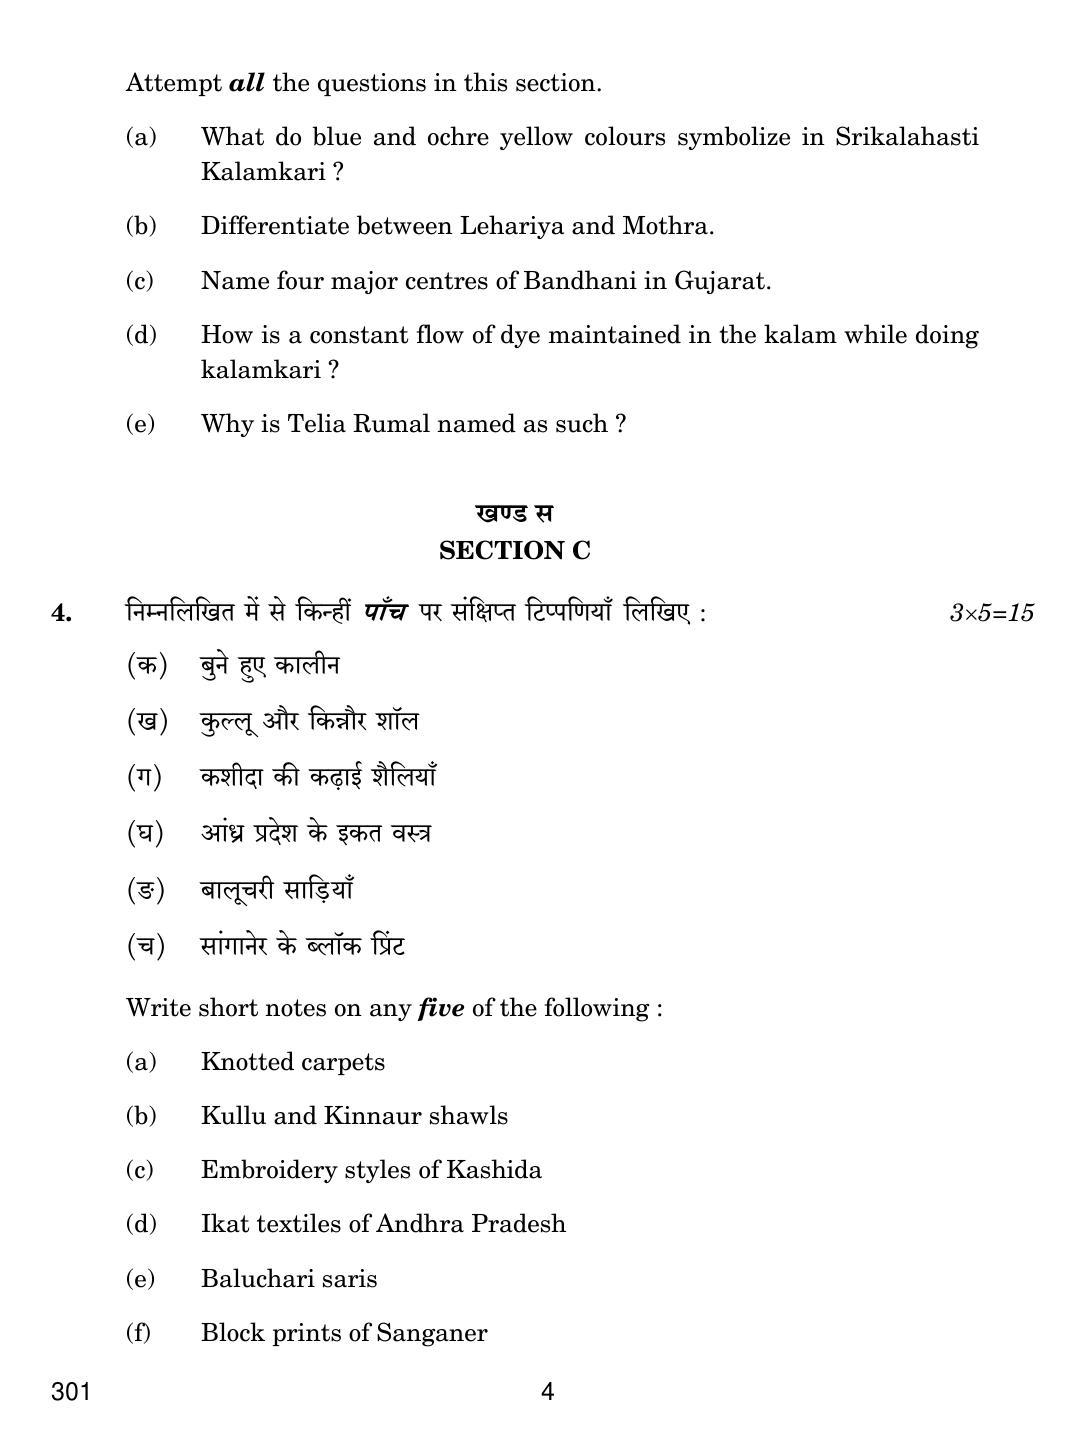 CBSE Class 12 301 TRAD. INDIAN TEXTILE 2018 Question Paper - Page 4